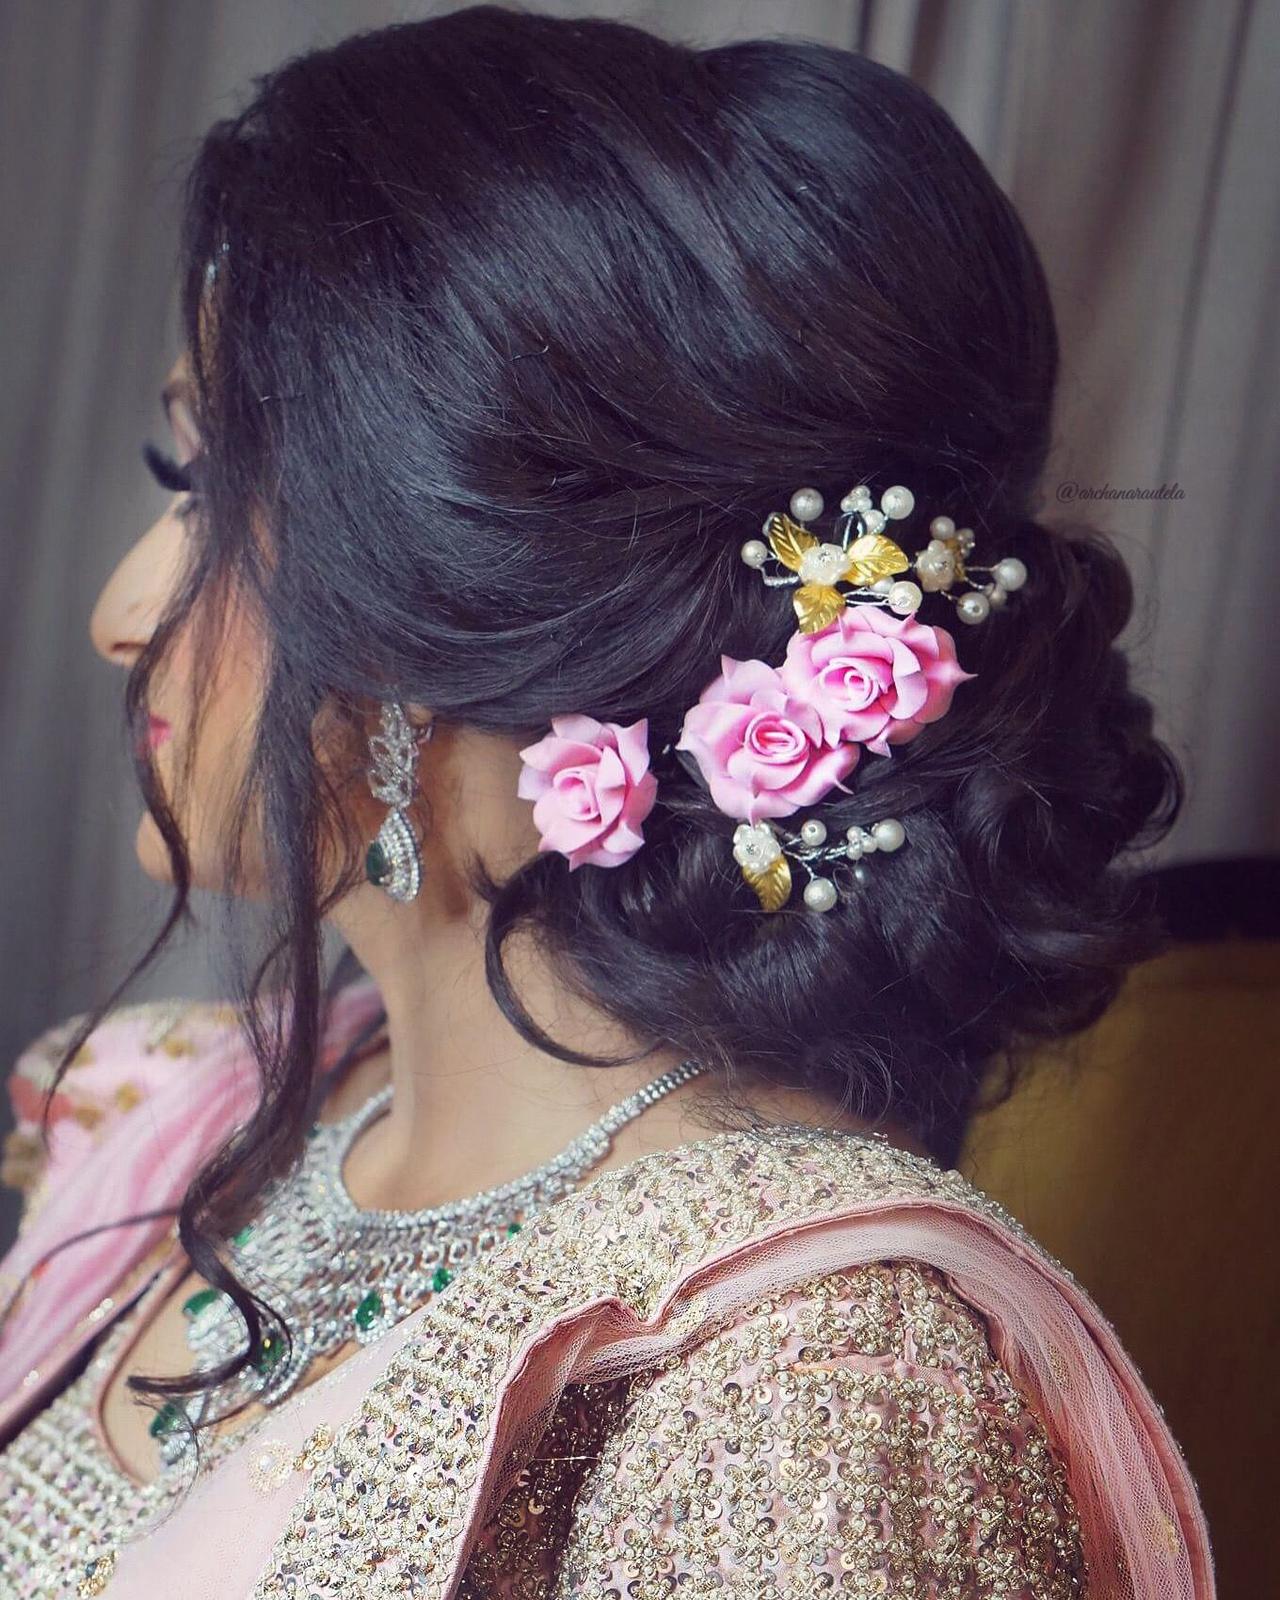 ONE SIDE FLOWER HAIRSTYLE | FOR WEDDING GUEST LOOK#hairgoals  #easyhairstyles #viral #explorepage - YouTube